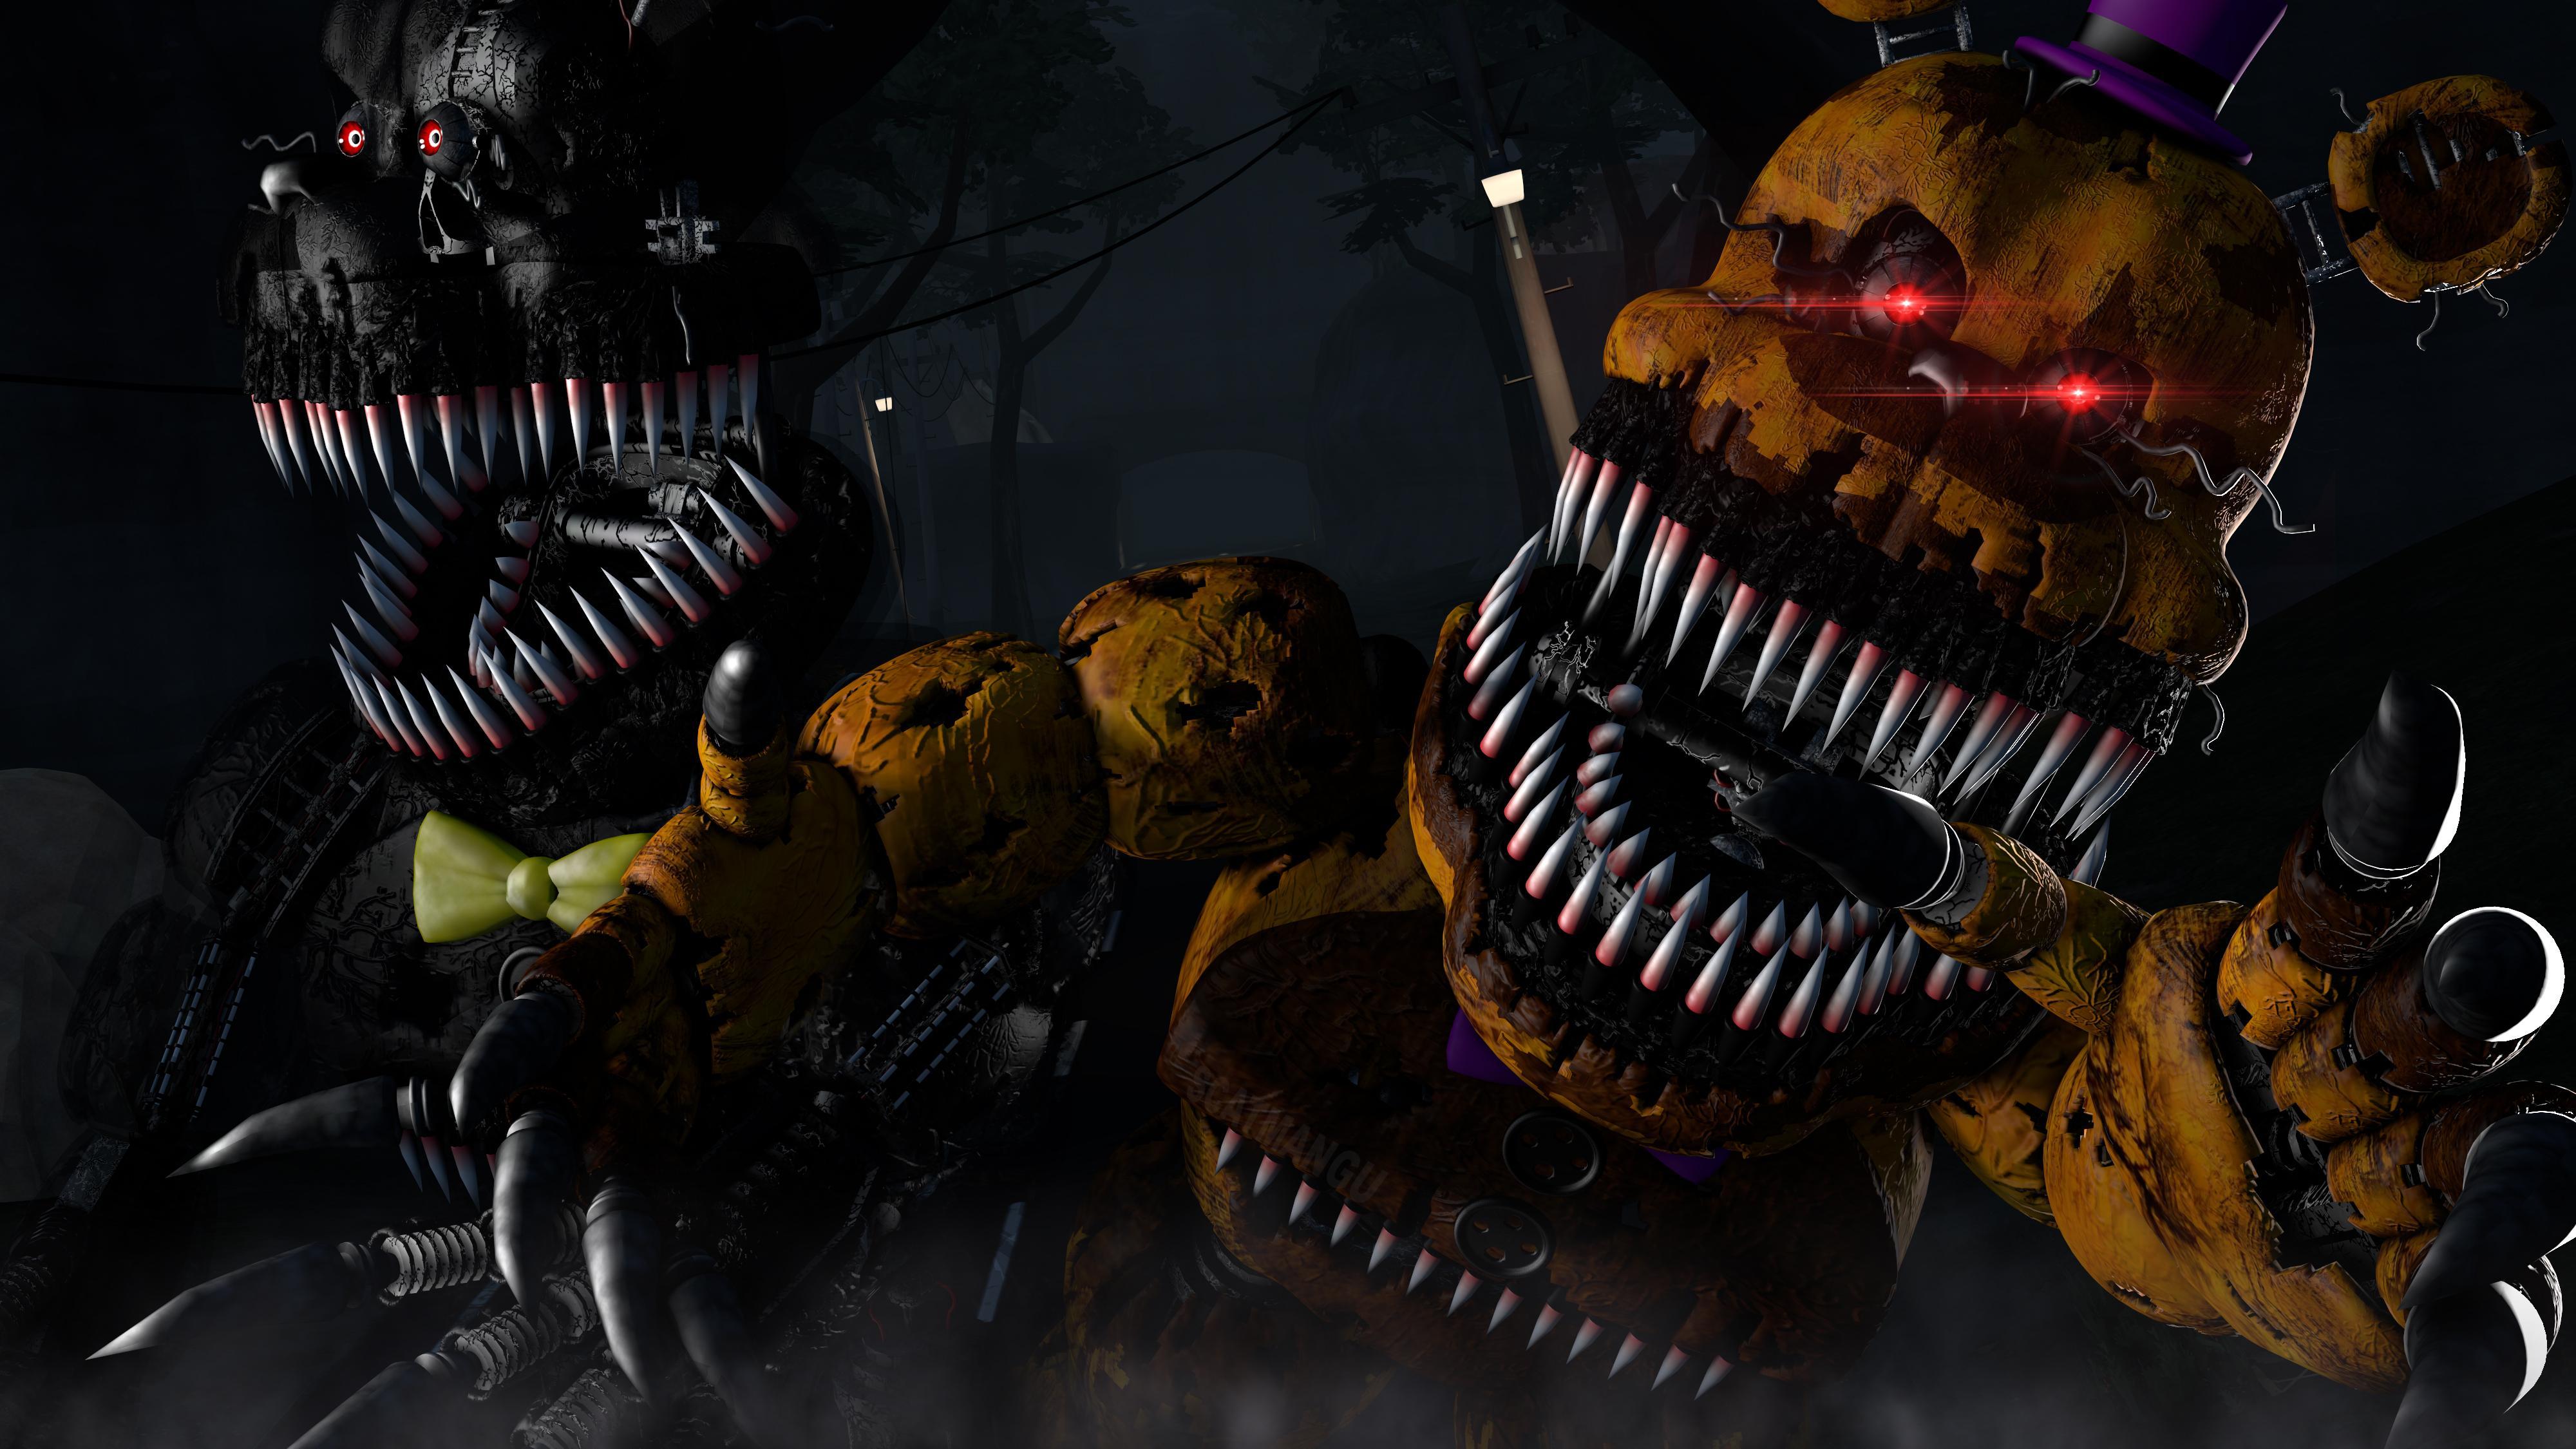 Five Nights at Freddy's 4 4k Ultra HD Wallpapers.